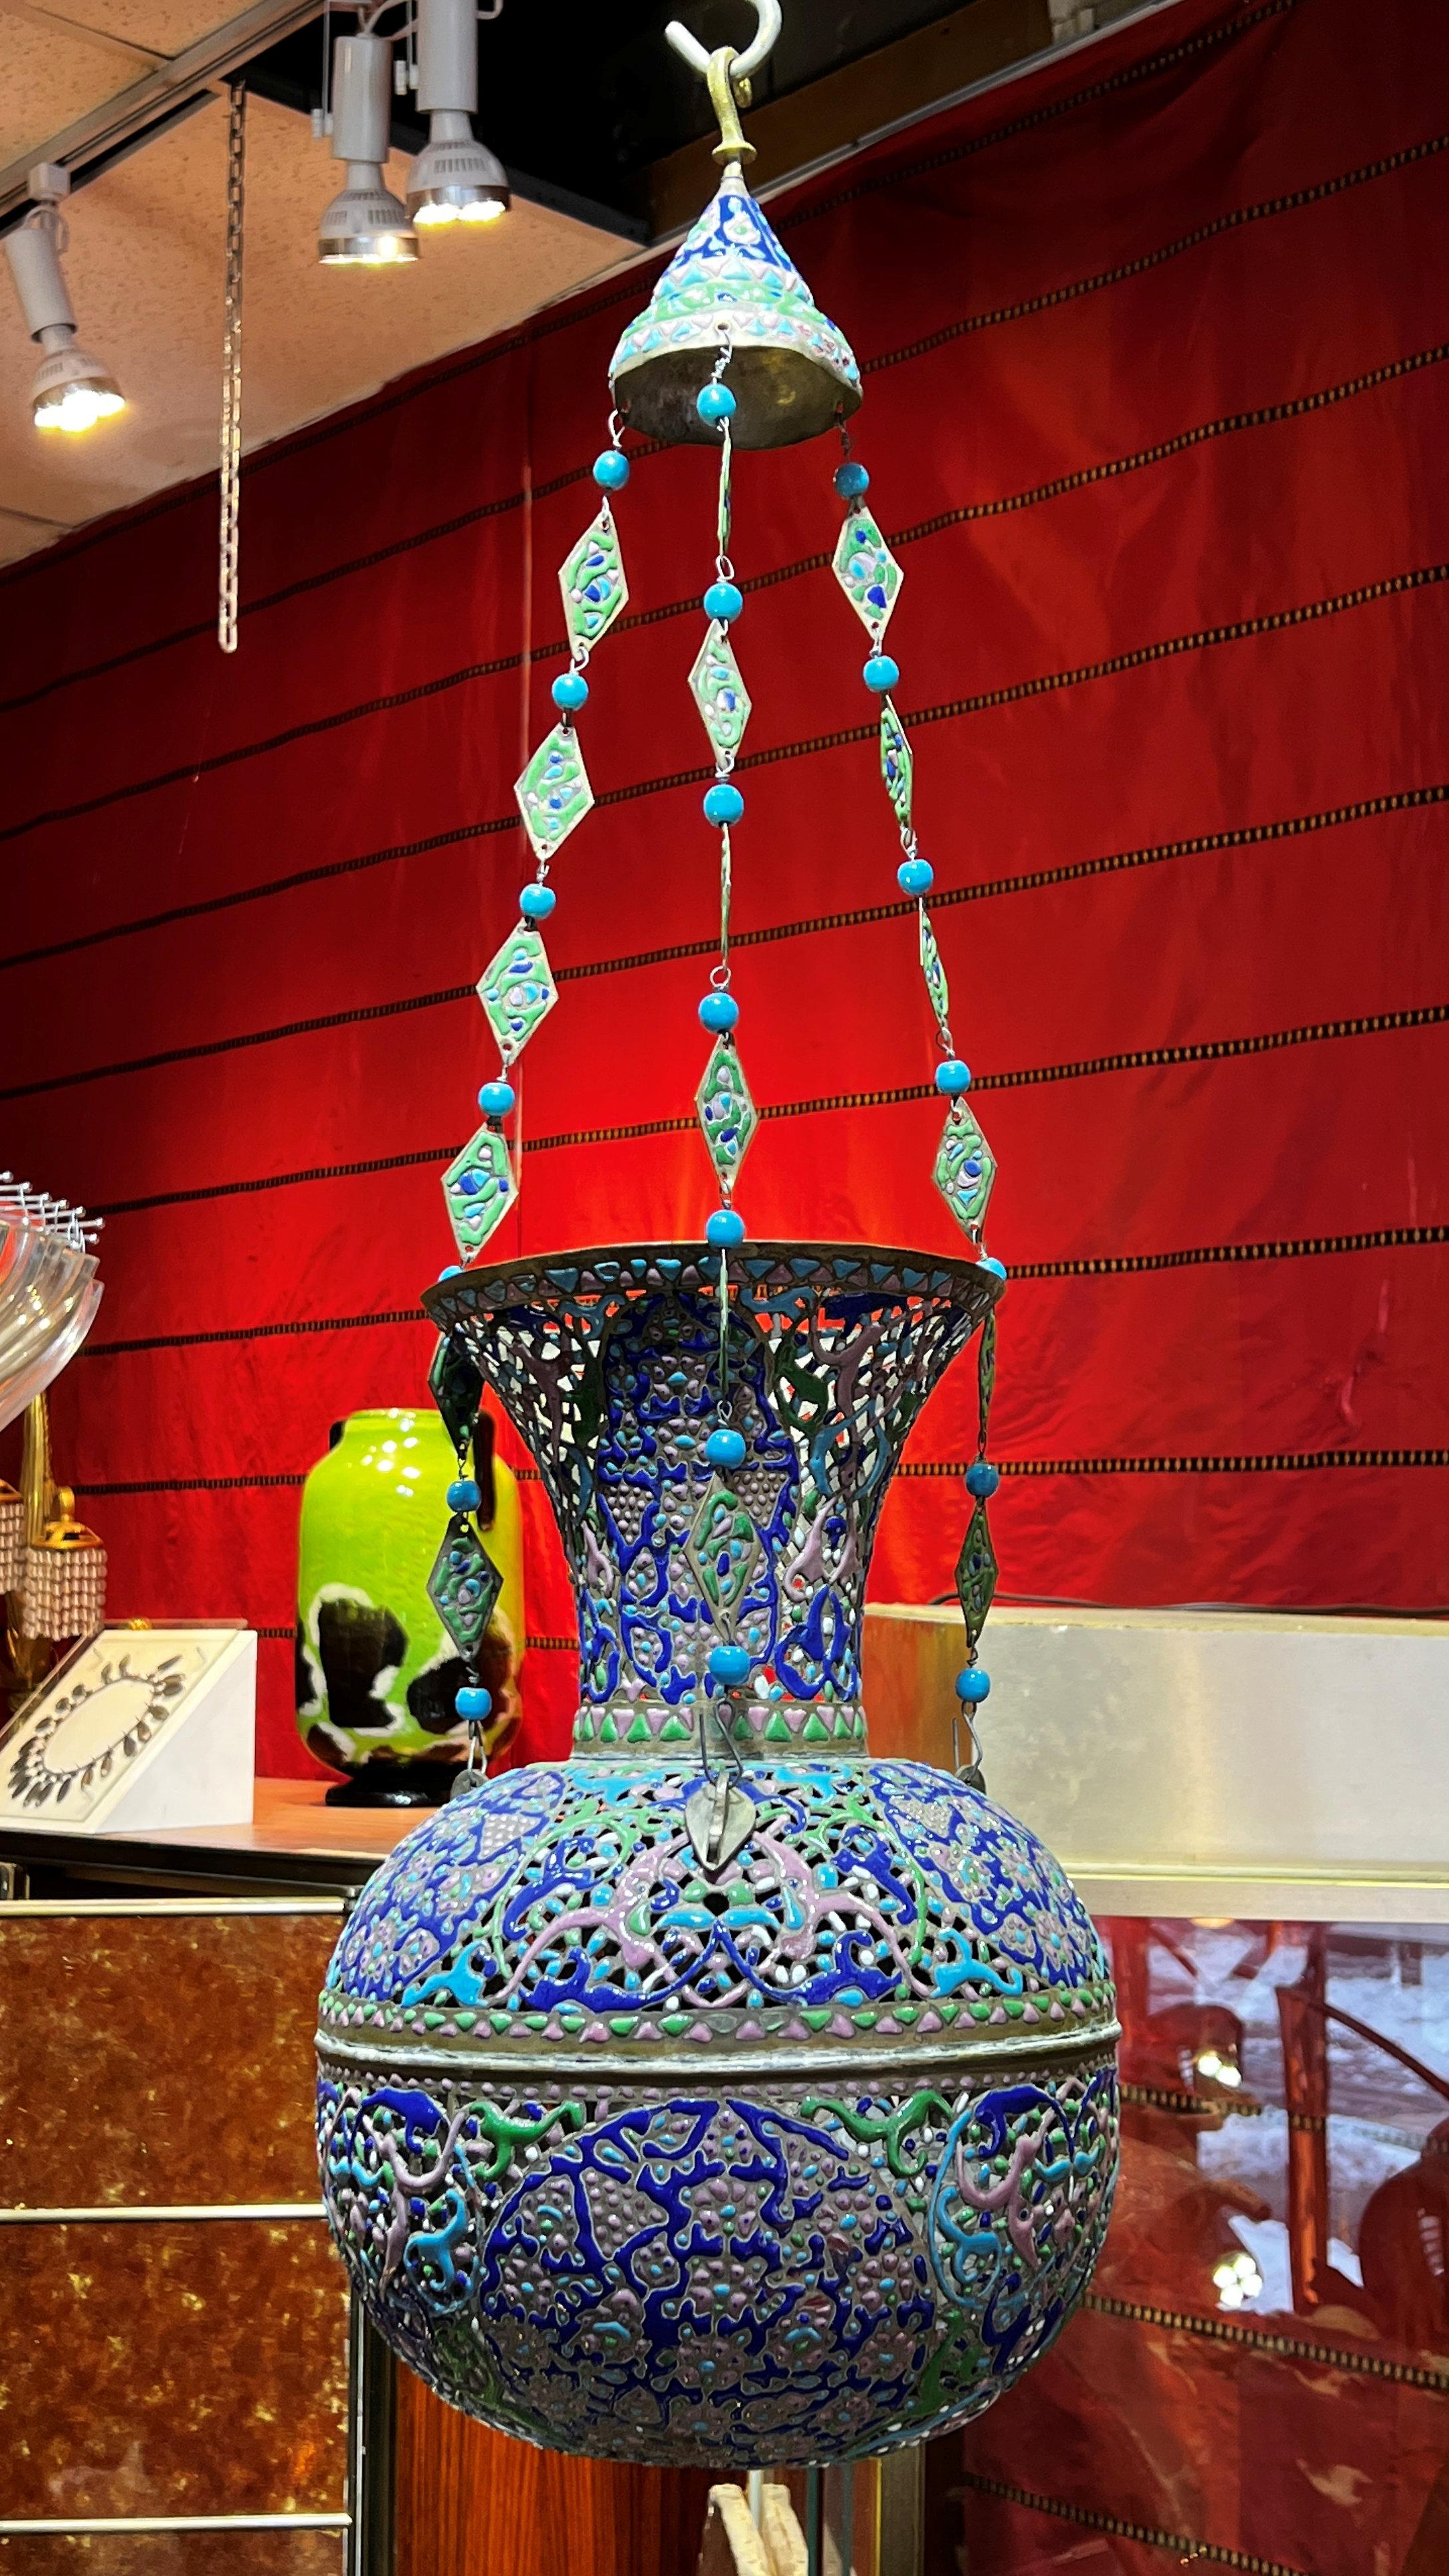 Our beautiful copper mosque lamp is distinguished for its reticulated form and lovely enameled arabesque designs in blue, lime green and pink, with its original suspension chains formed of blue beads and diamond shaped enameled metal.

( Lampe de